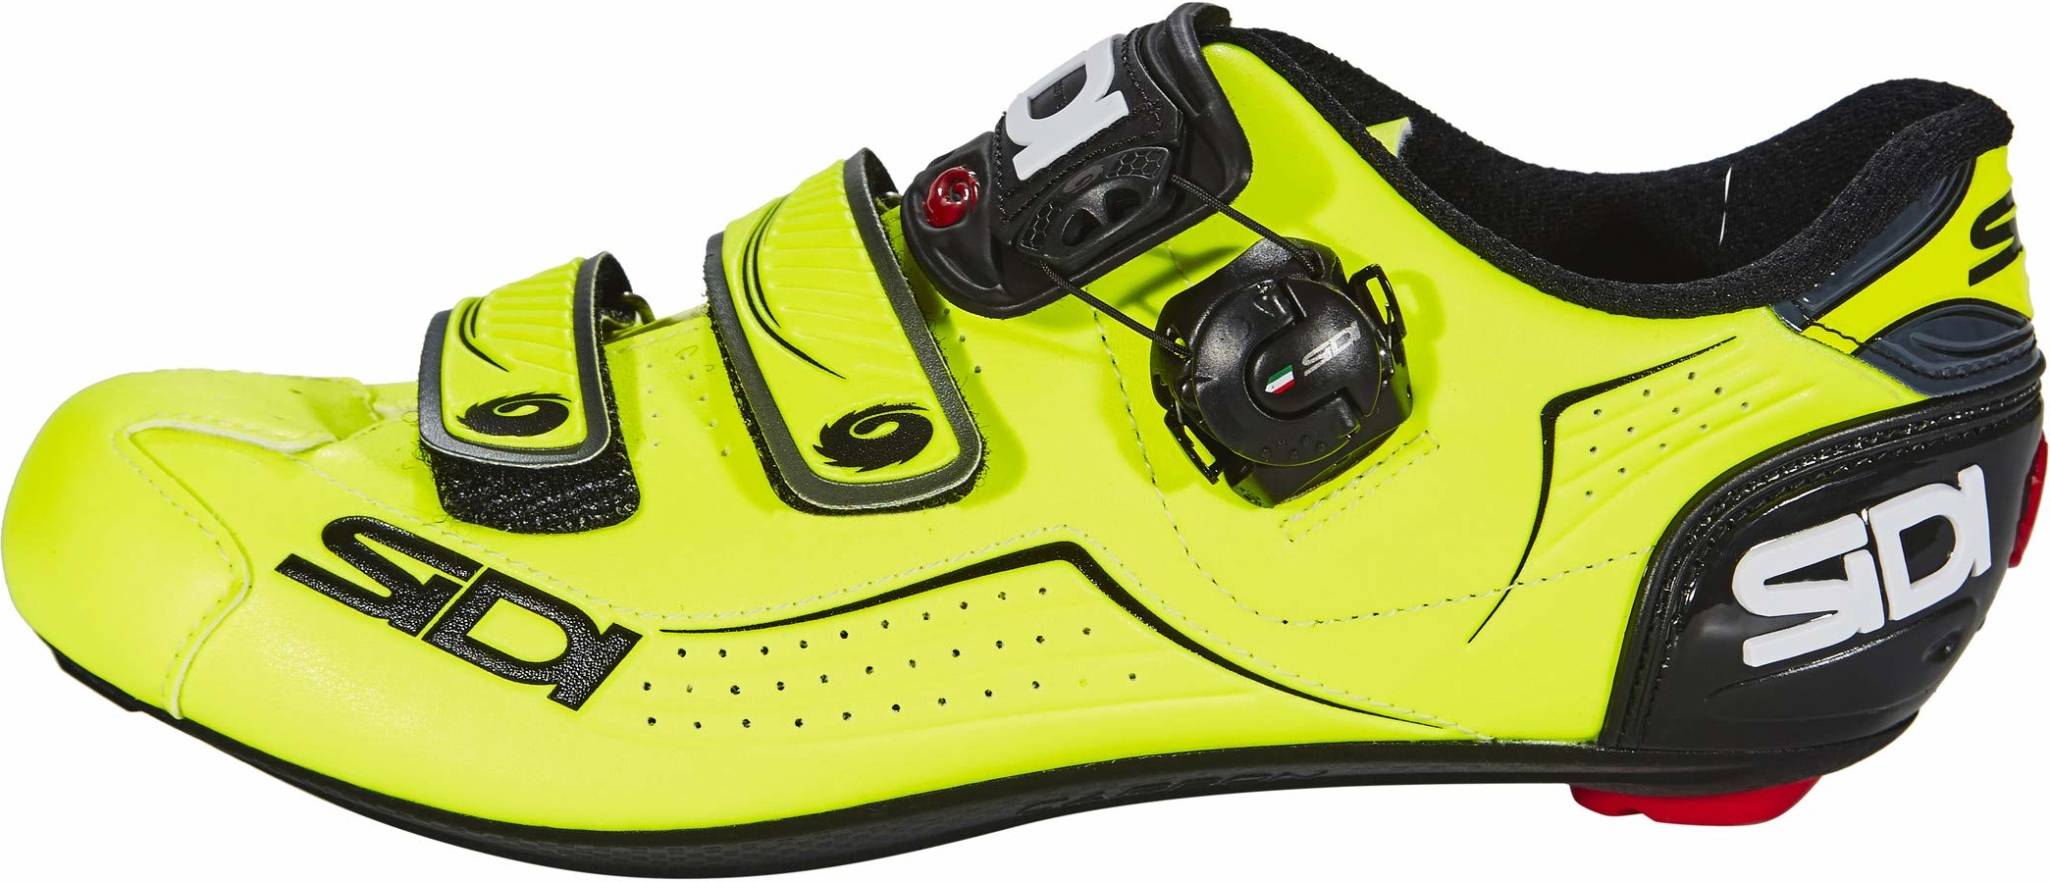 Only $190 + Review of Sidi Alba | RunRepeat